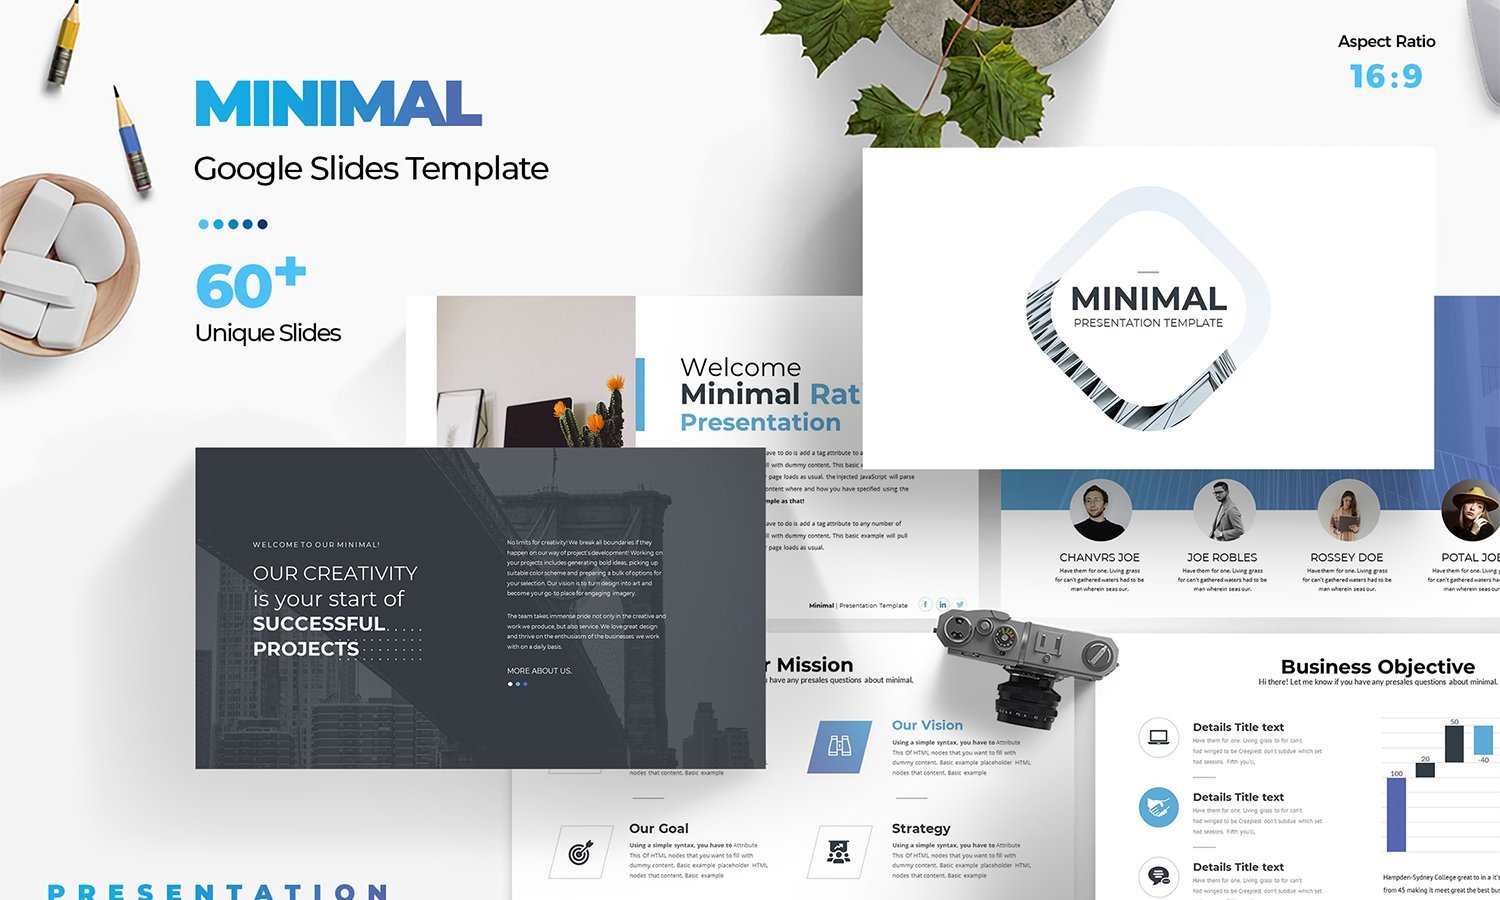 Kit Graphique #396047 Template Annual Web Design - Logo template Preview